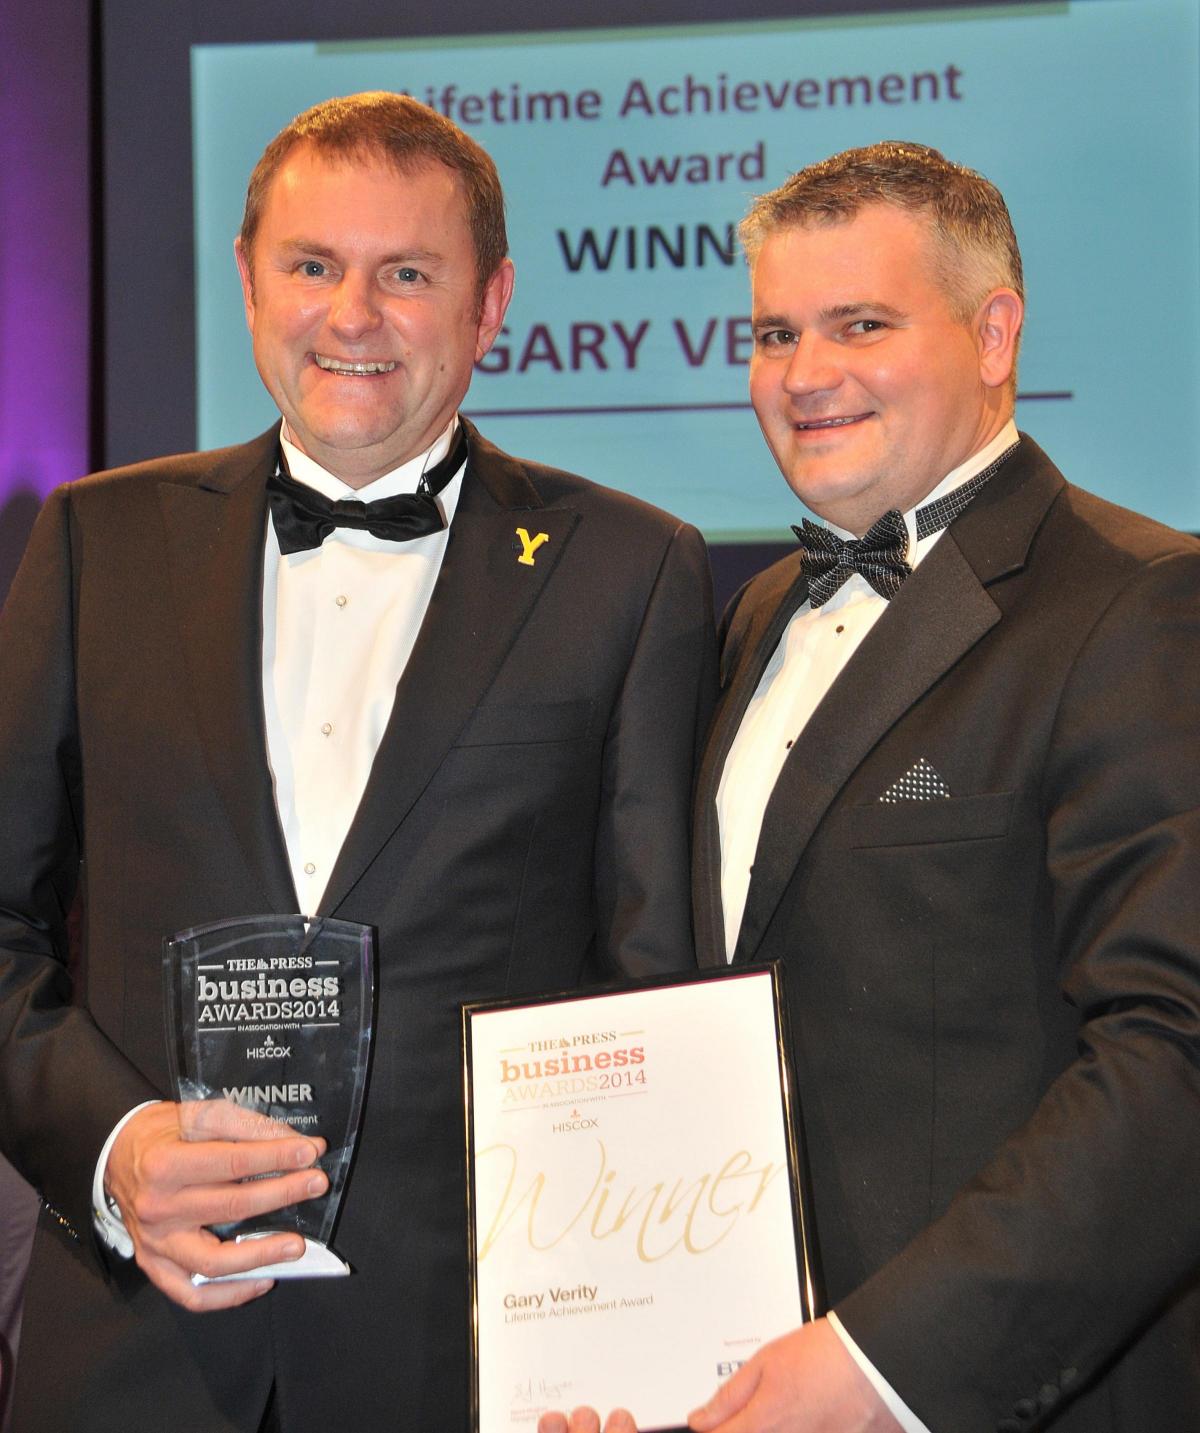 Gary Verity, chief executive of Welcome To Yorkshire, left, receives his Lifetime Achievement Award from Danny Longbottom, managing director of BT Business